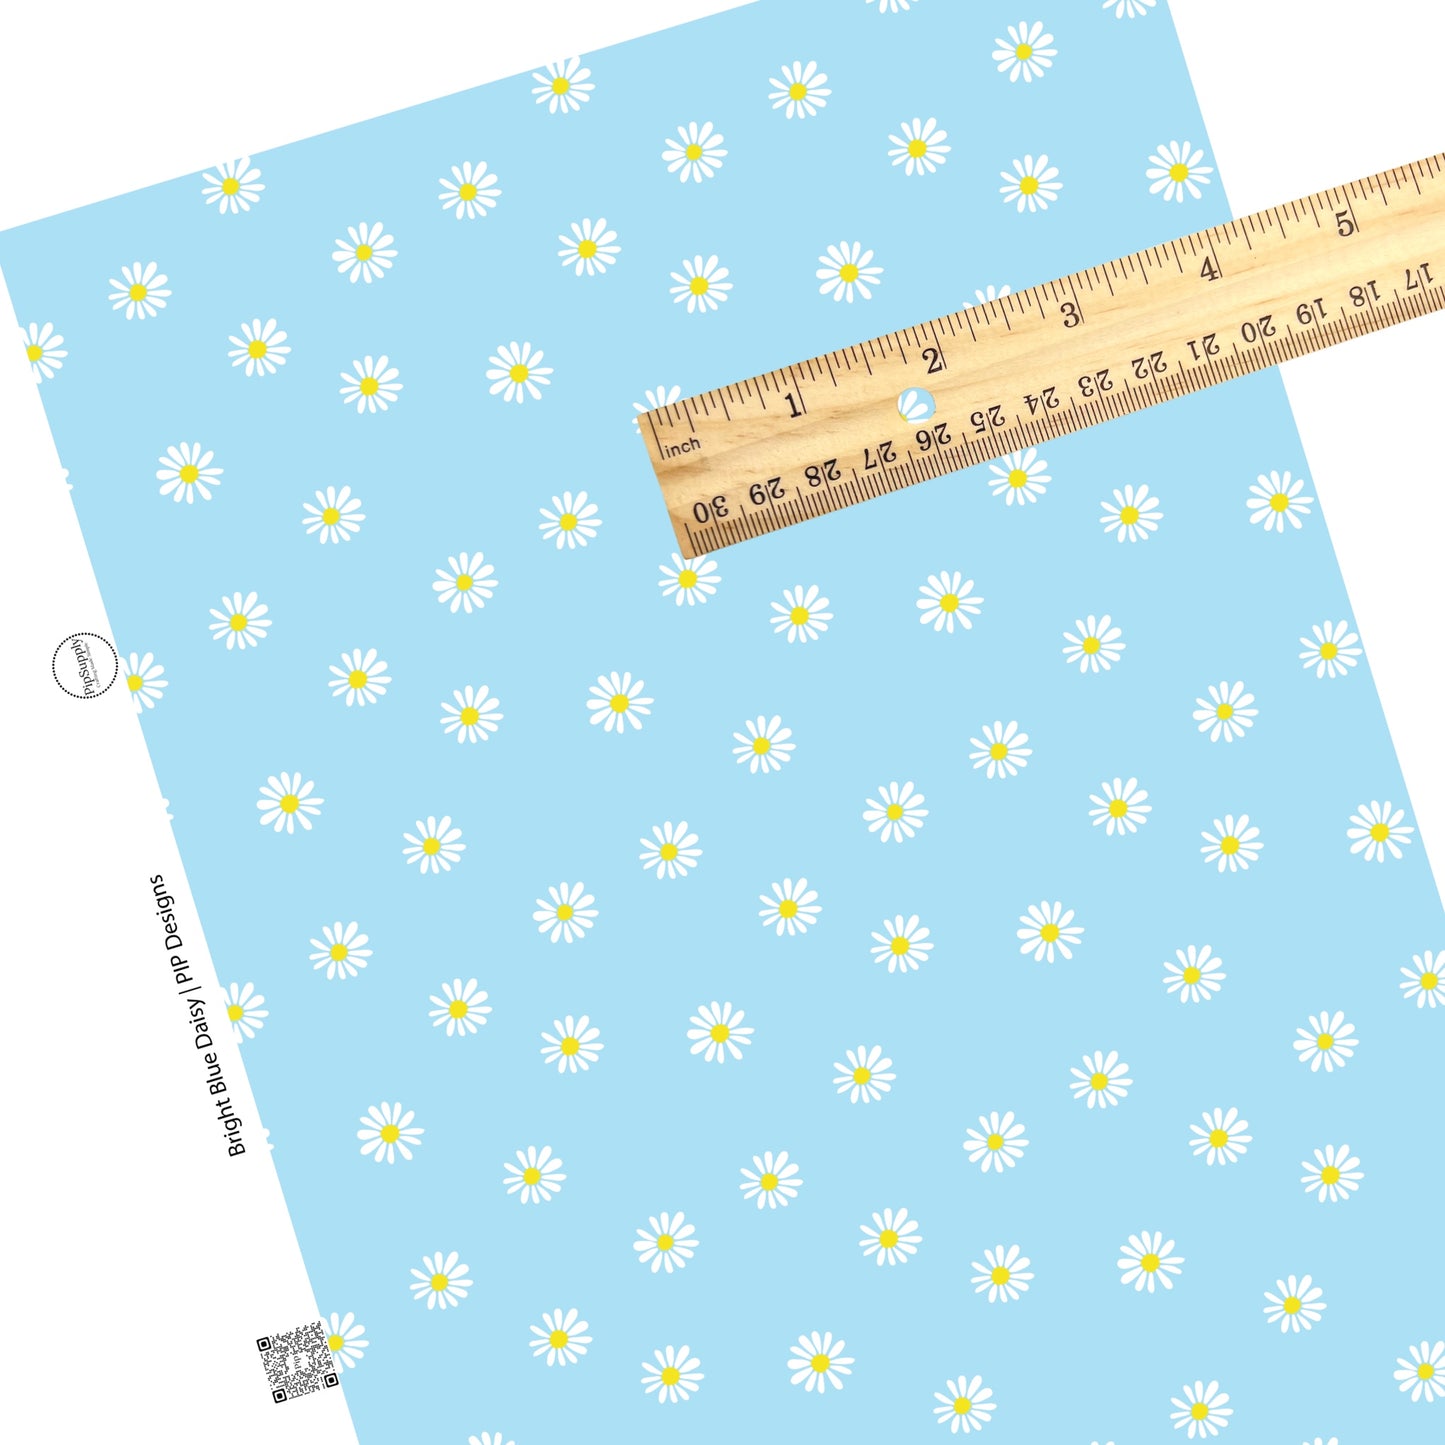 Light Blue Faux Leather Sheet with Tiny White Daisies - Custom Printed Faux Leather Spring Daisy Patterns 